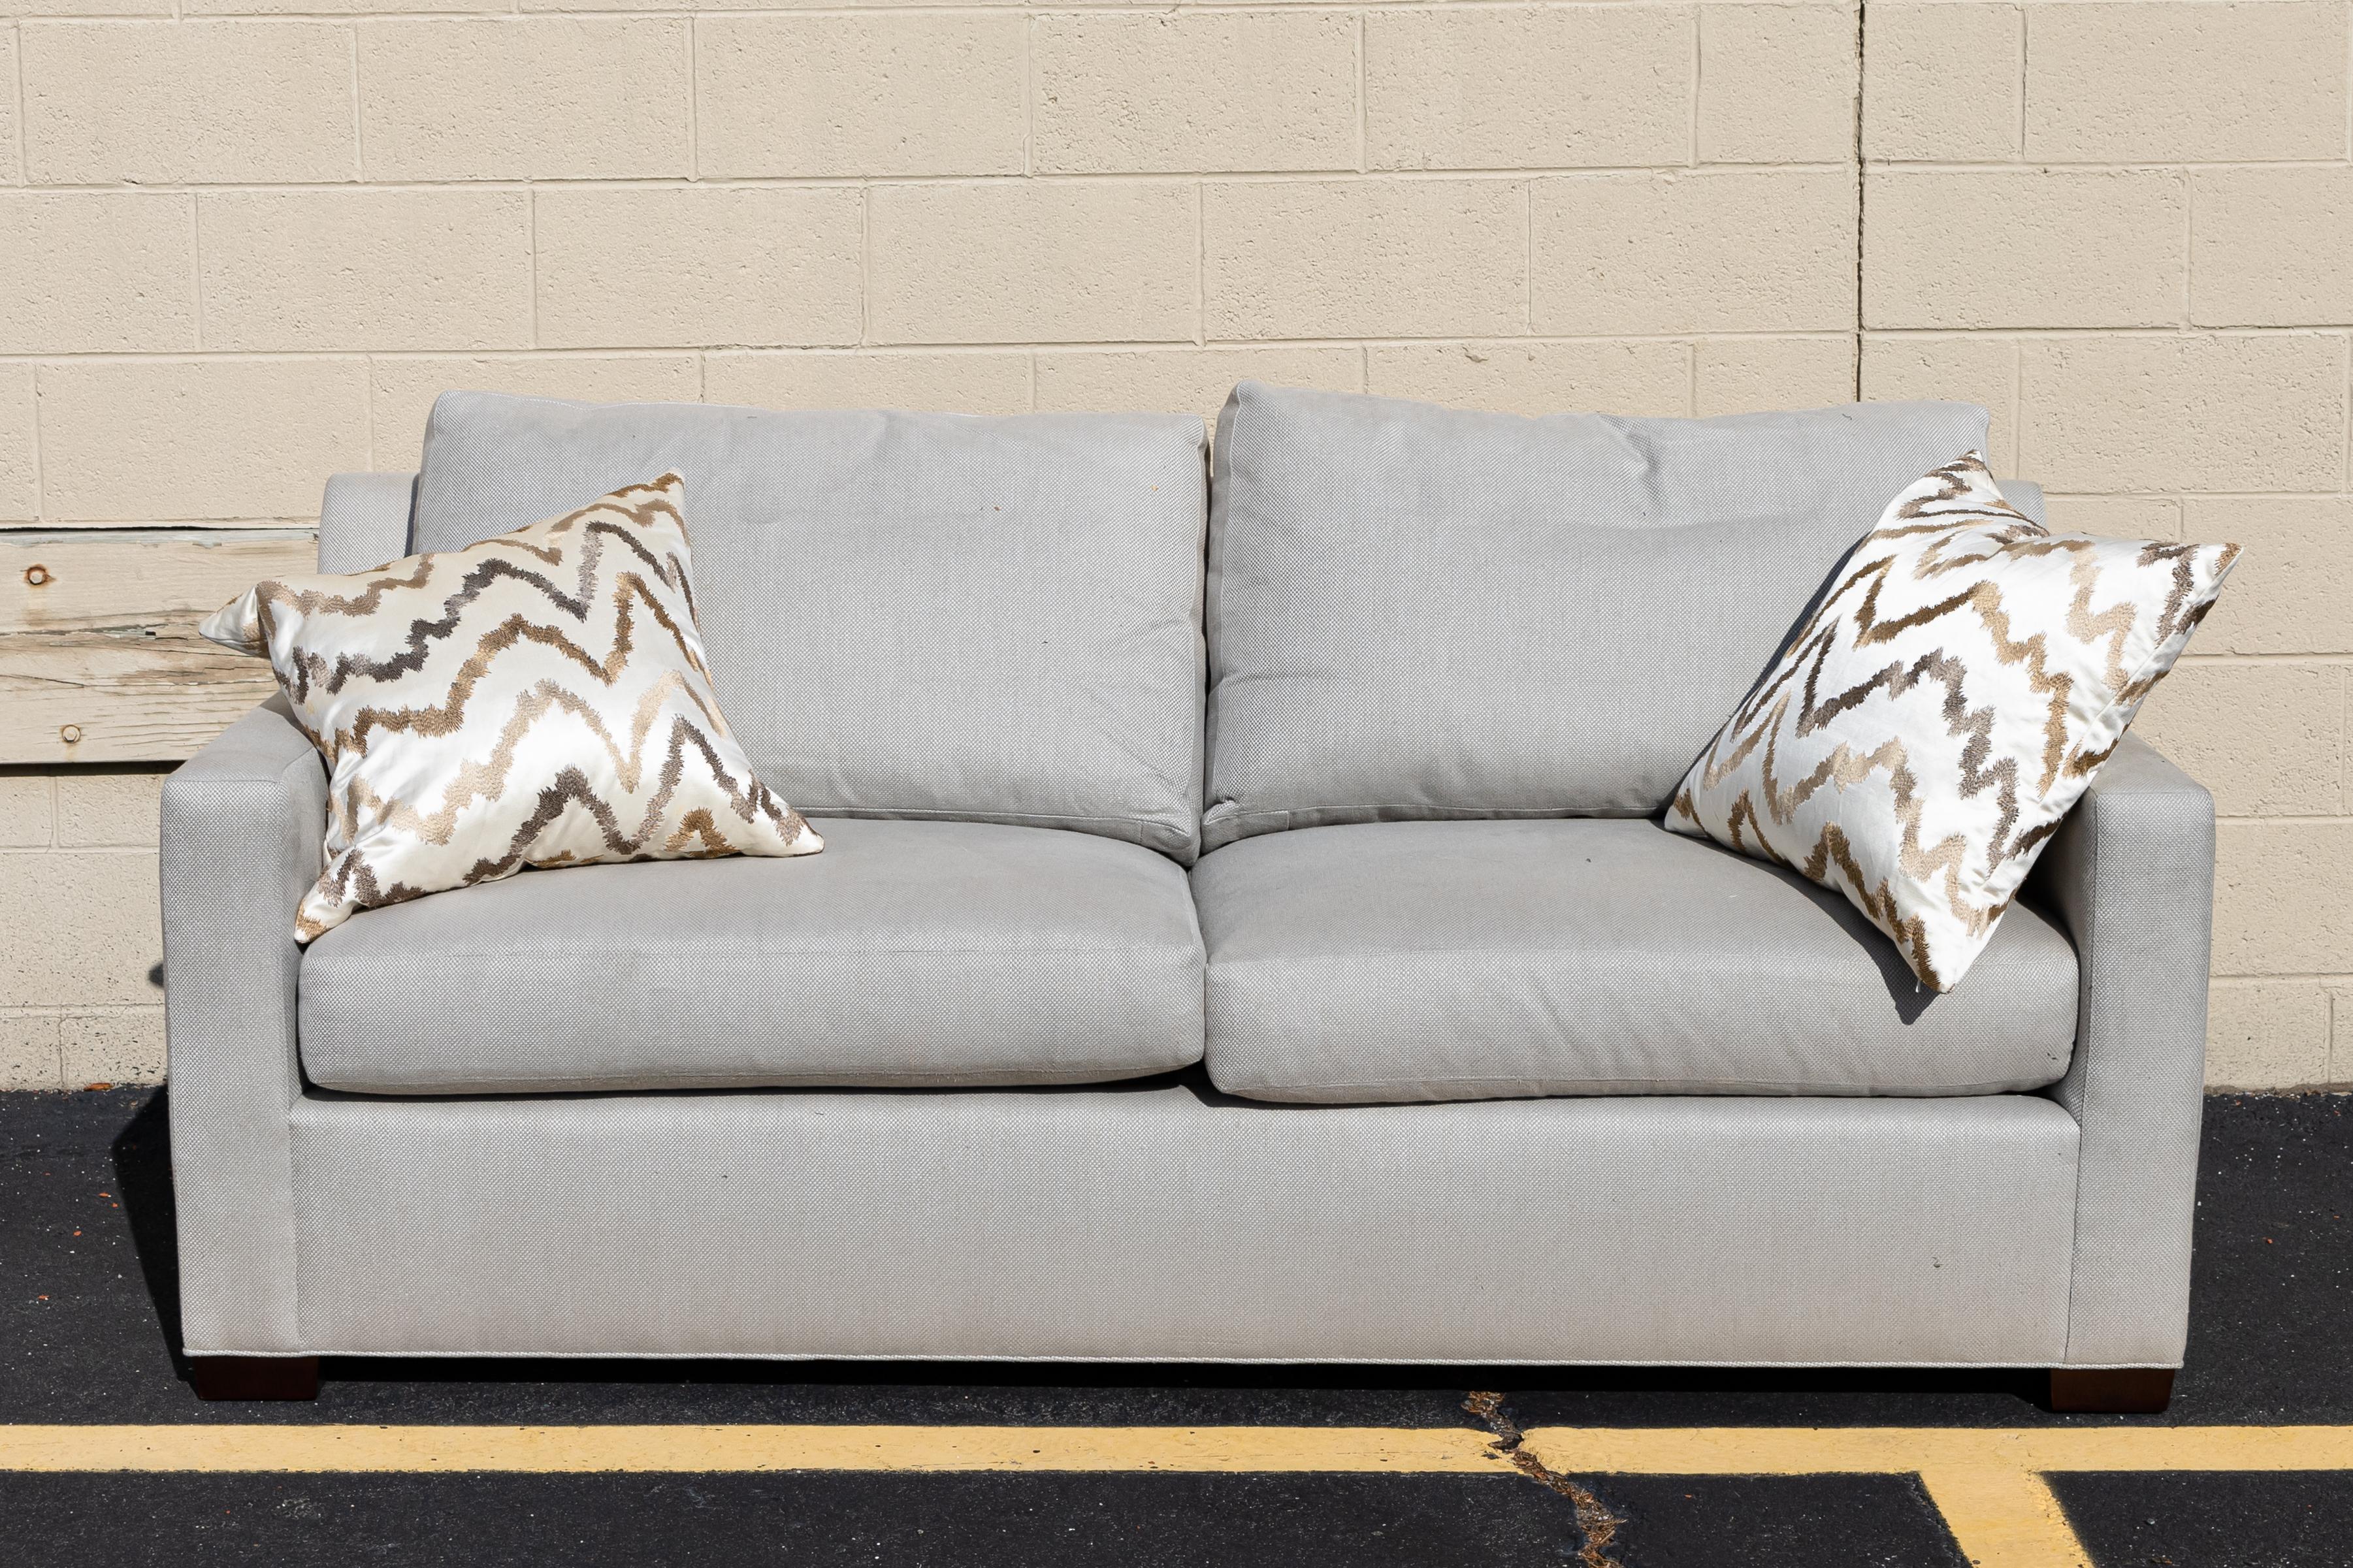 A modern contemporary Baker love seat. This sofa comes with matching cushions and pillows. They are removable from the piece. This piece is in very good condition with only slight wear around the legs common with used condition. This sofa measures